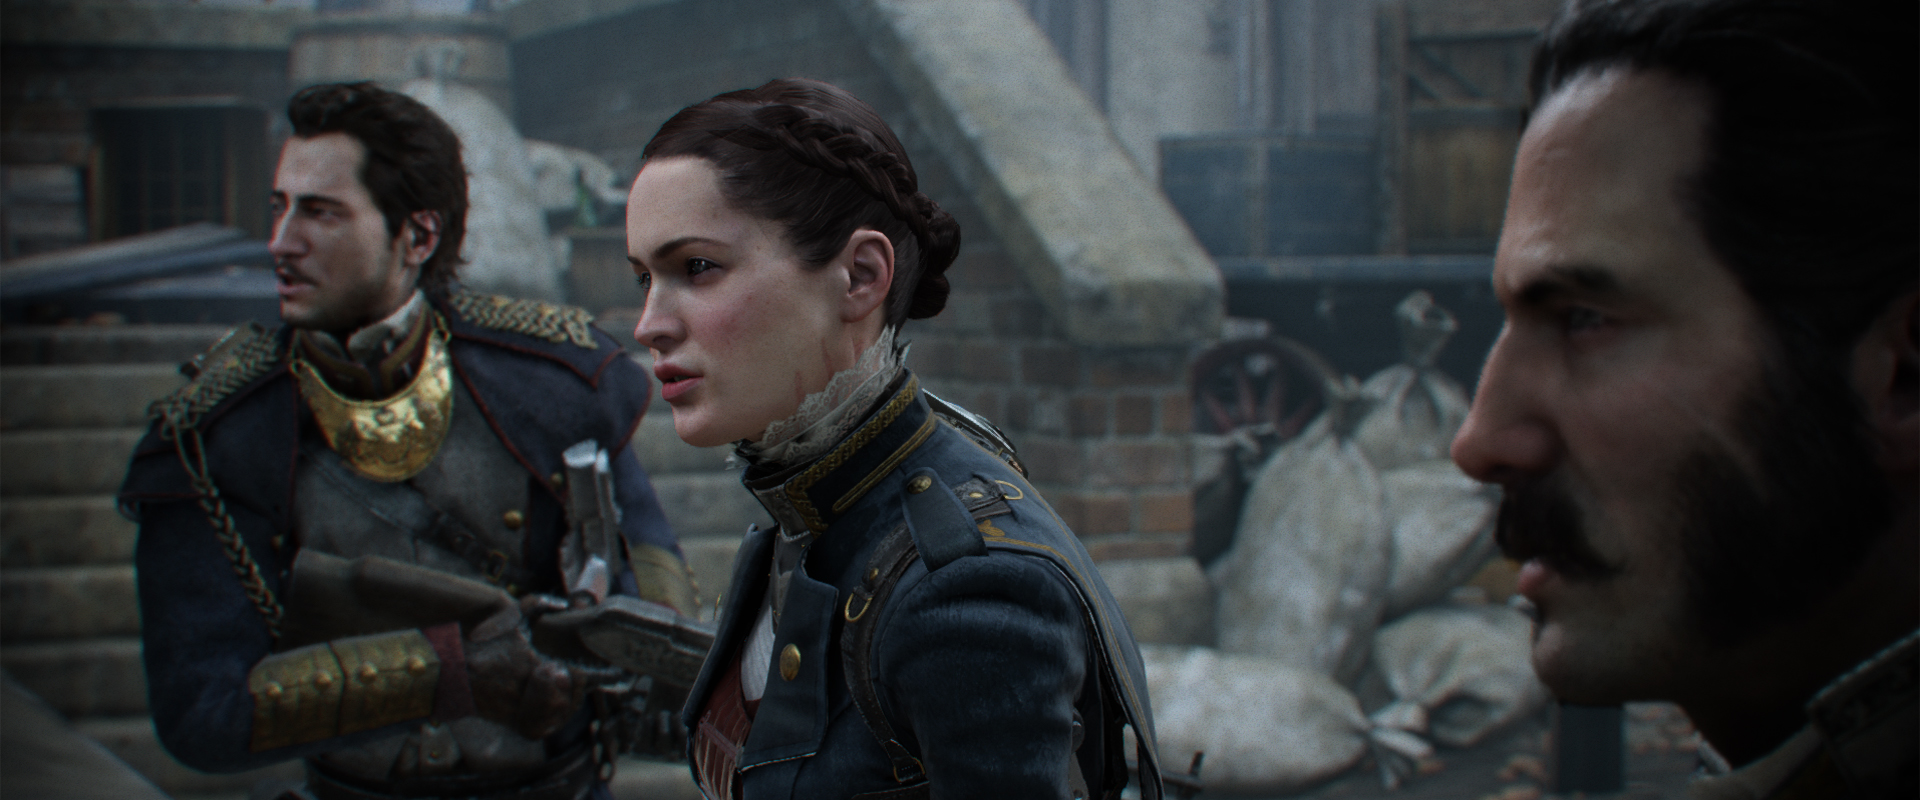 The Order: 1886 Is 30 Frames Per Second And Darn Proud Of It